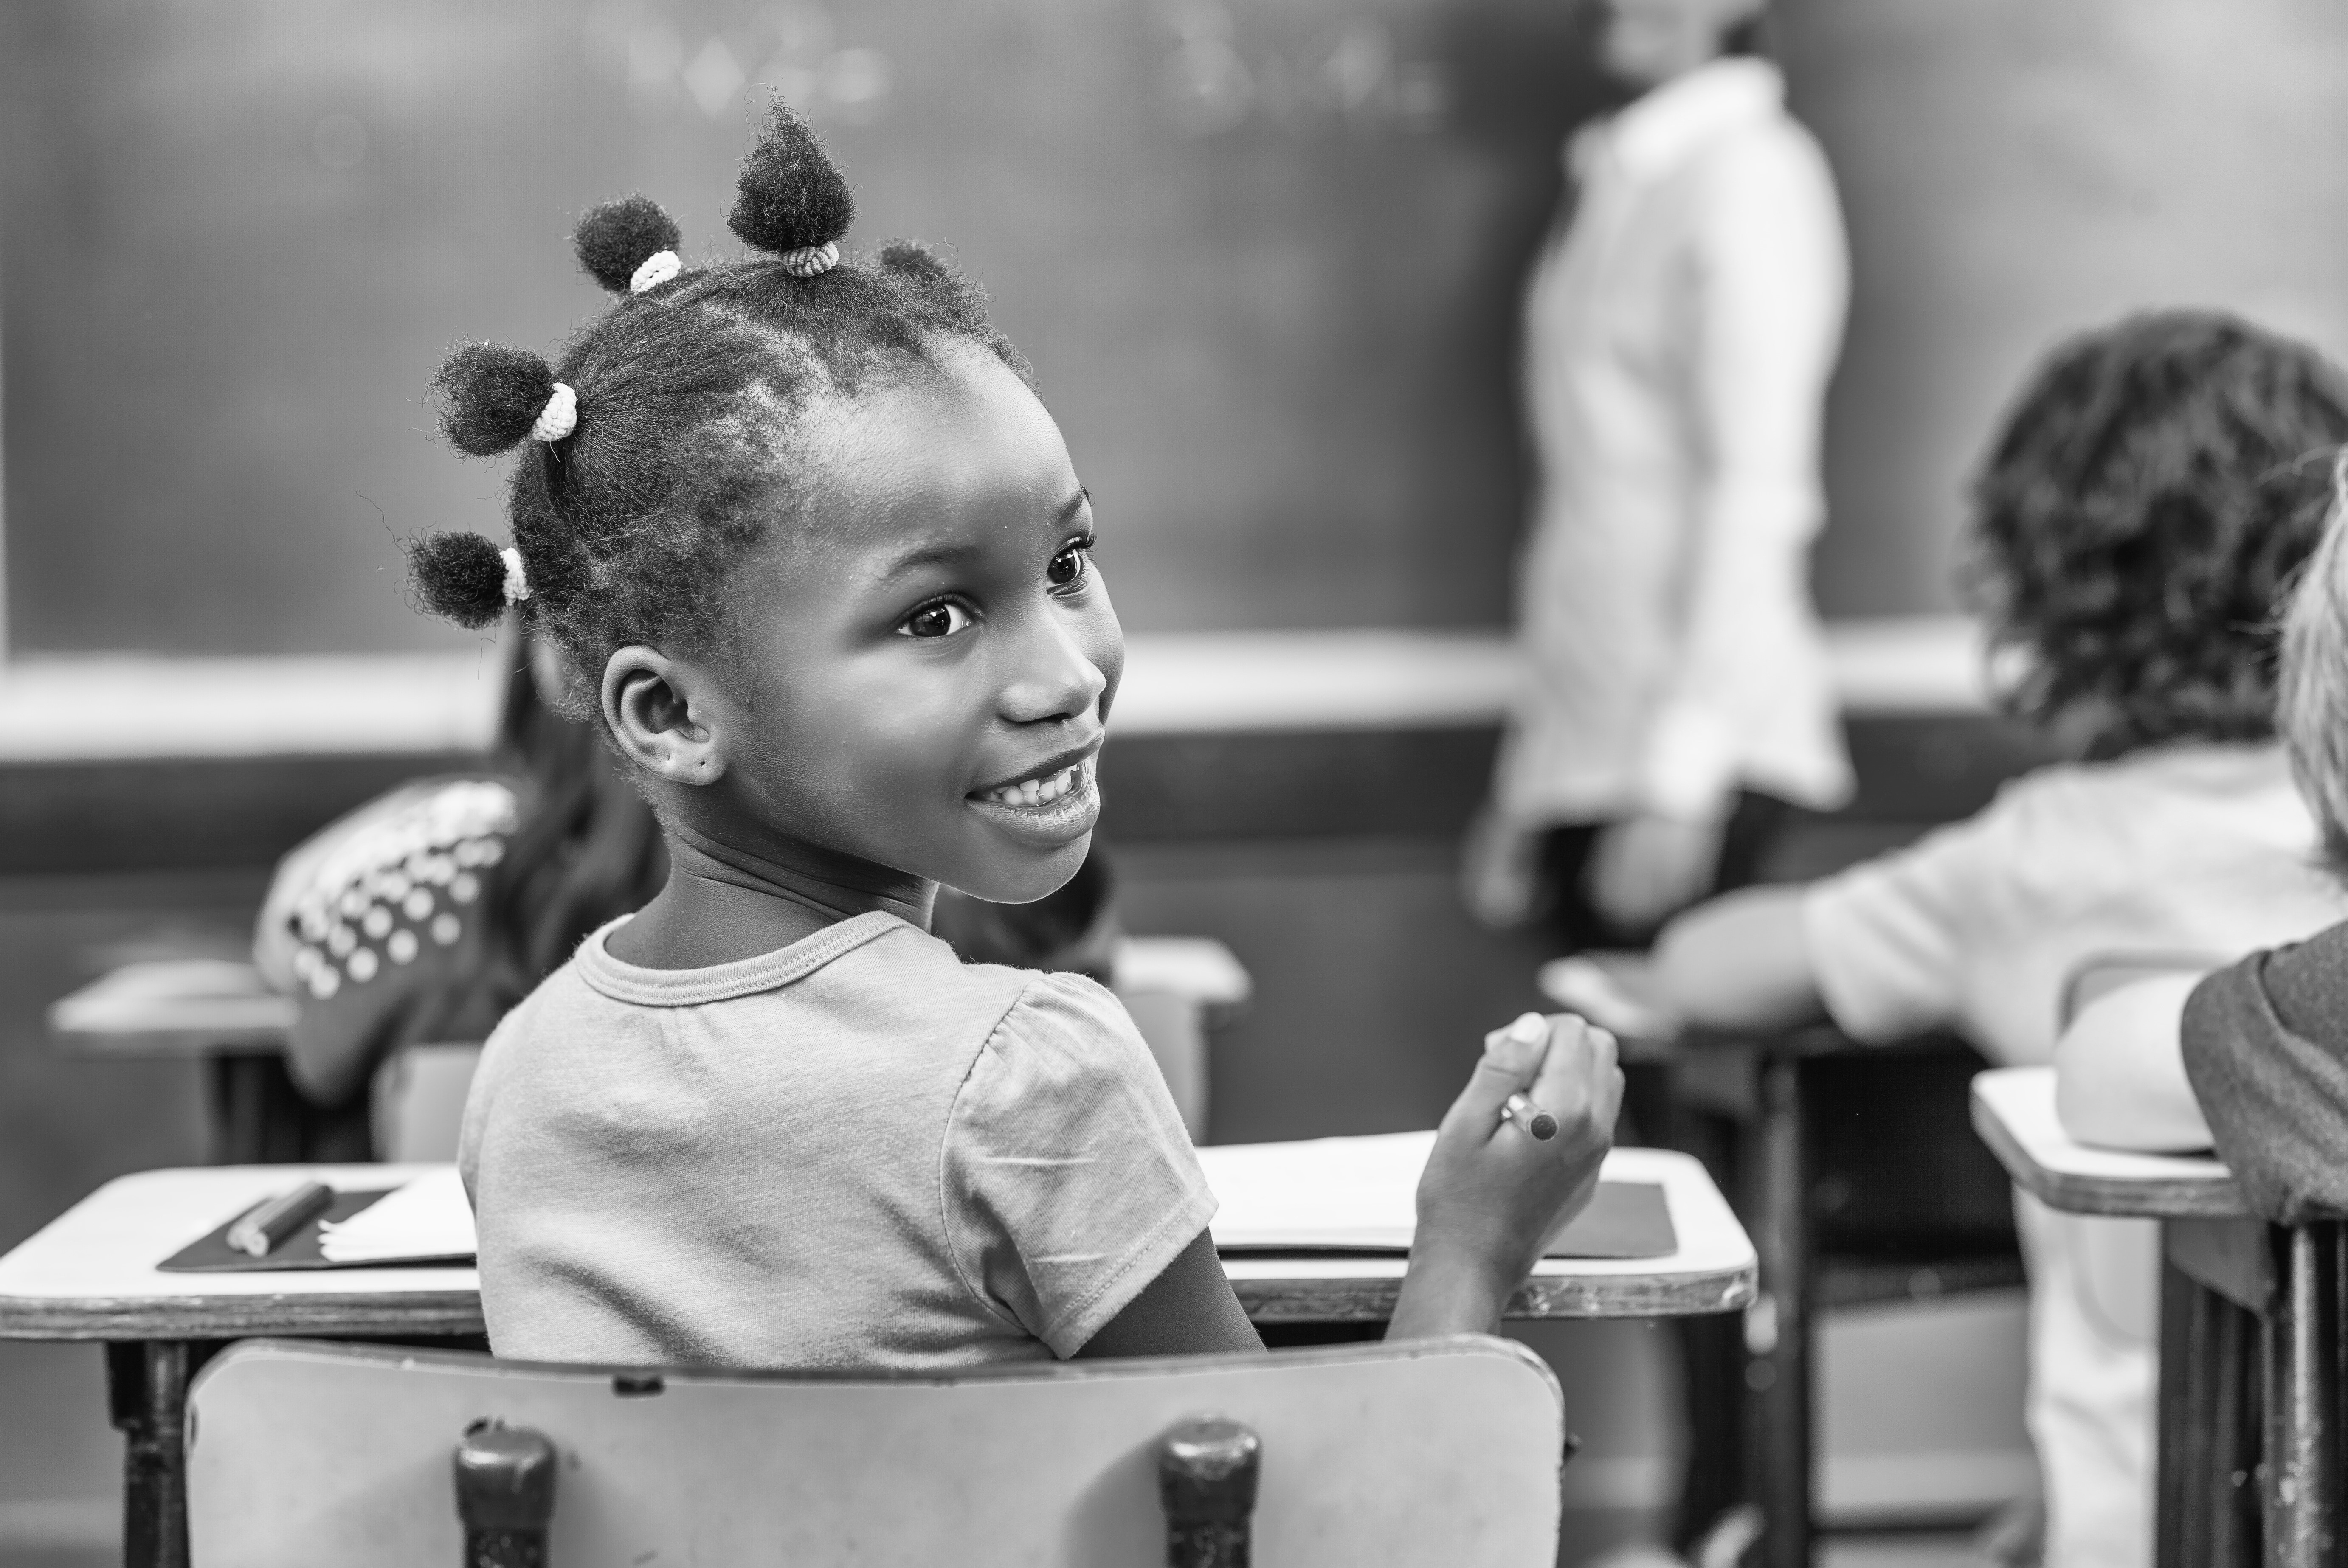 African girl turning in her chair at primary school. From GCIR's Black History Month: Diversity and Strength of the Black Immigrant Community in the U.S. webinar.